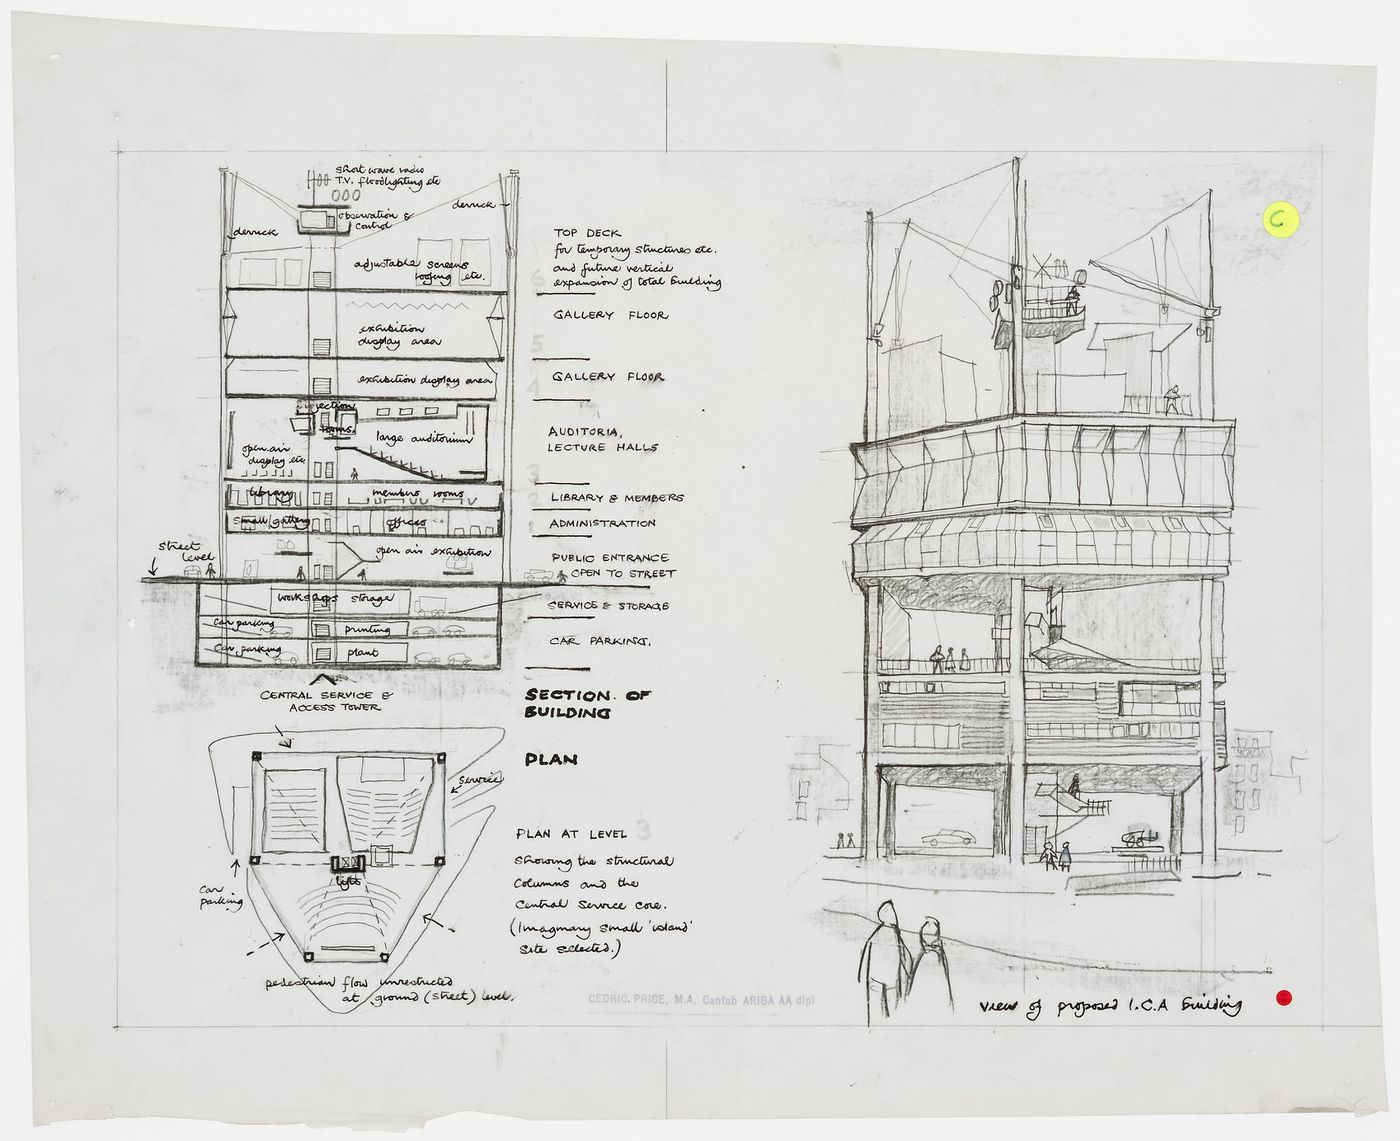 Section, plan and perspective view for headquarters for the Institute of Contemporary Arts, Kensington, London, England